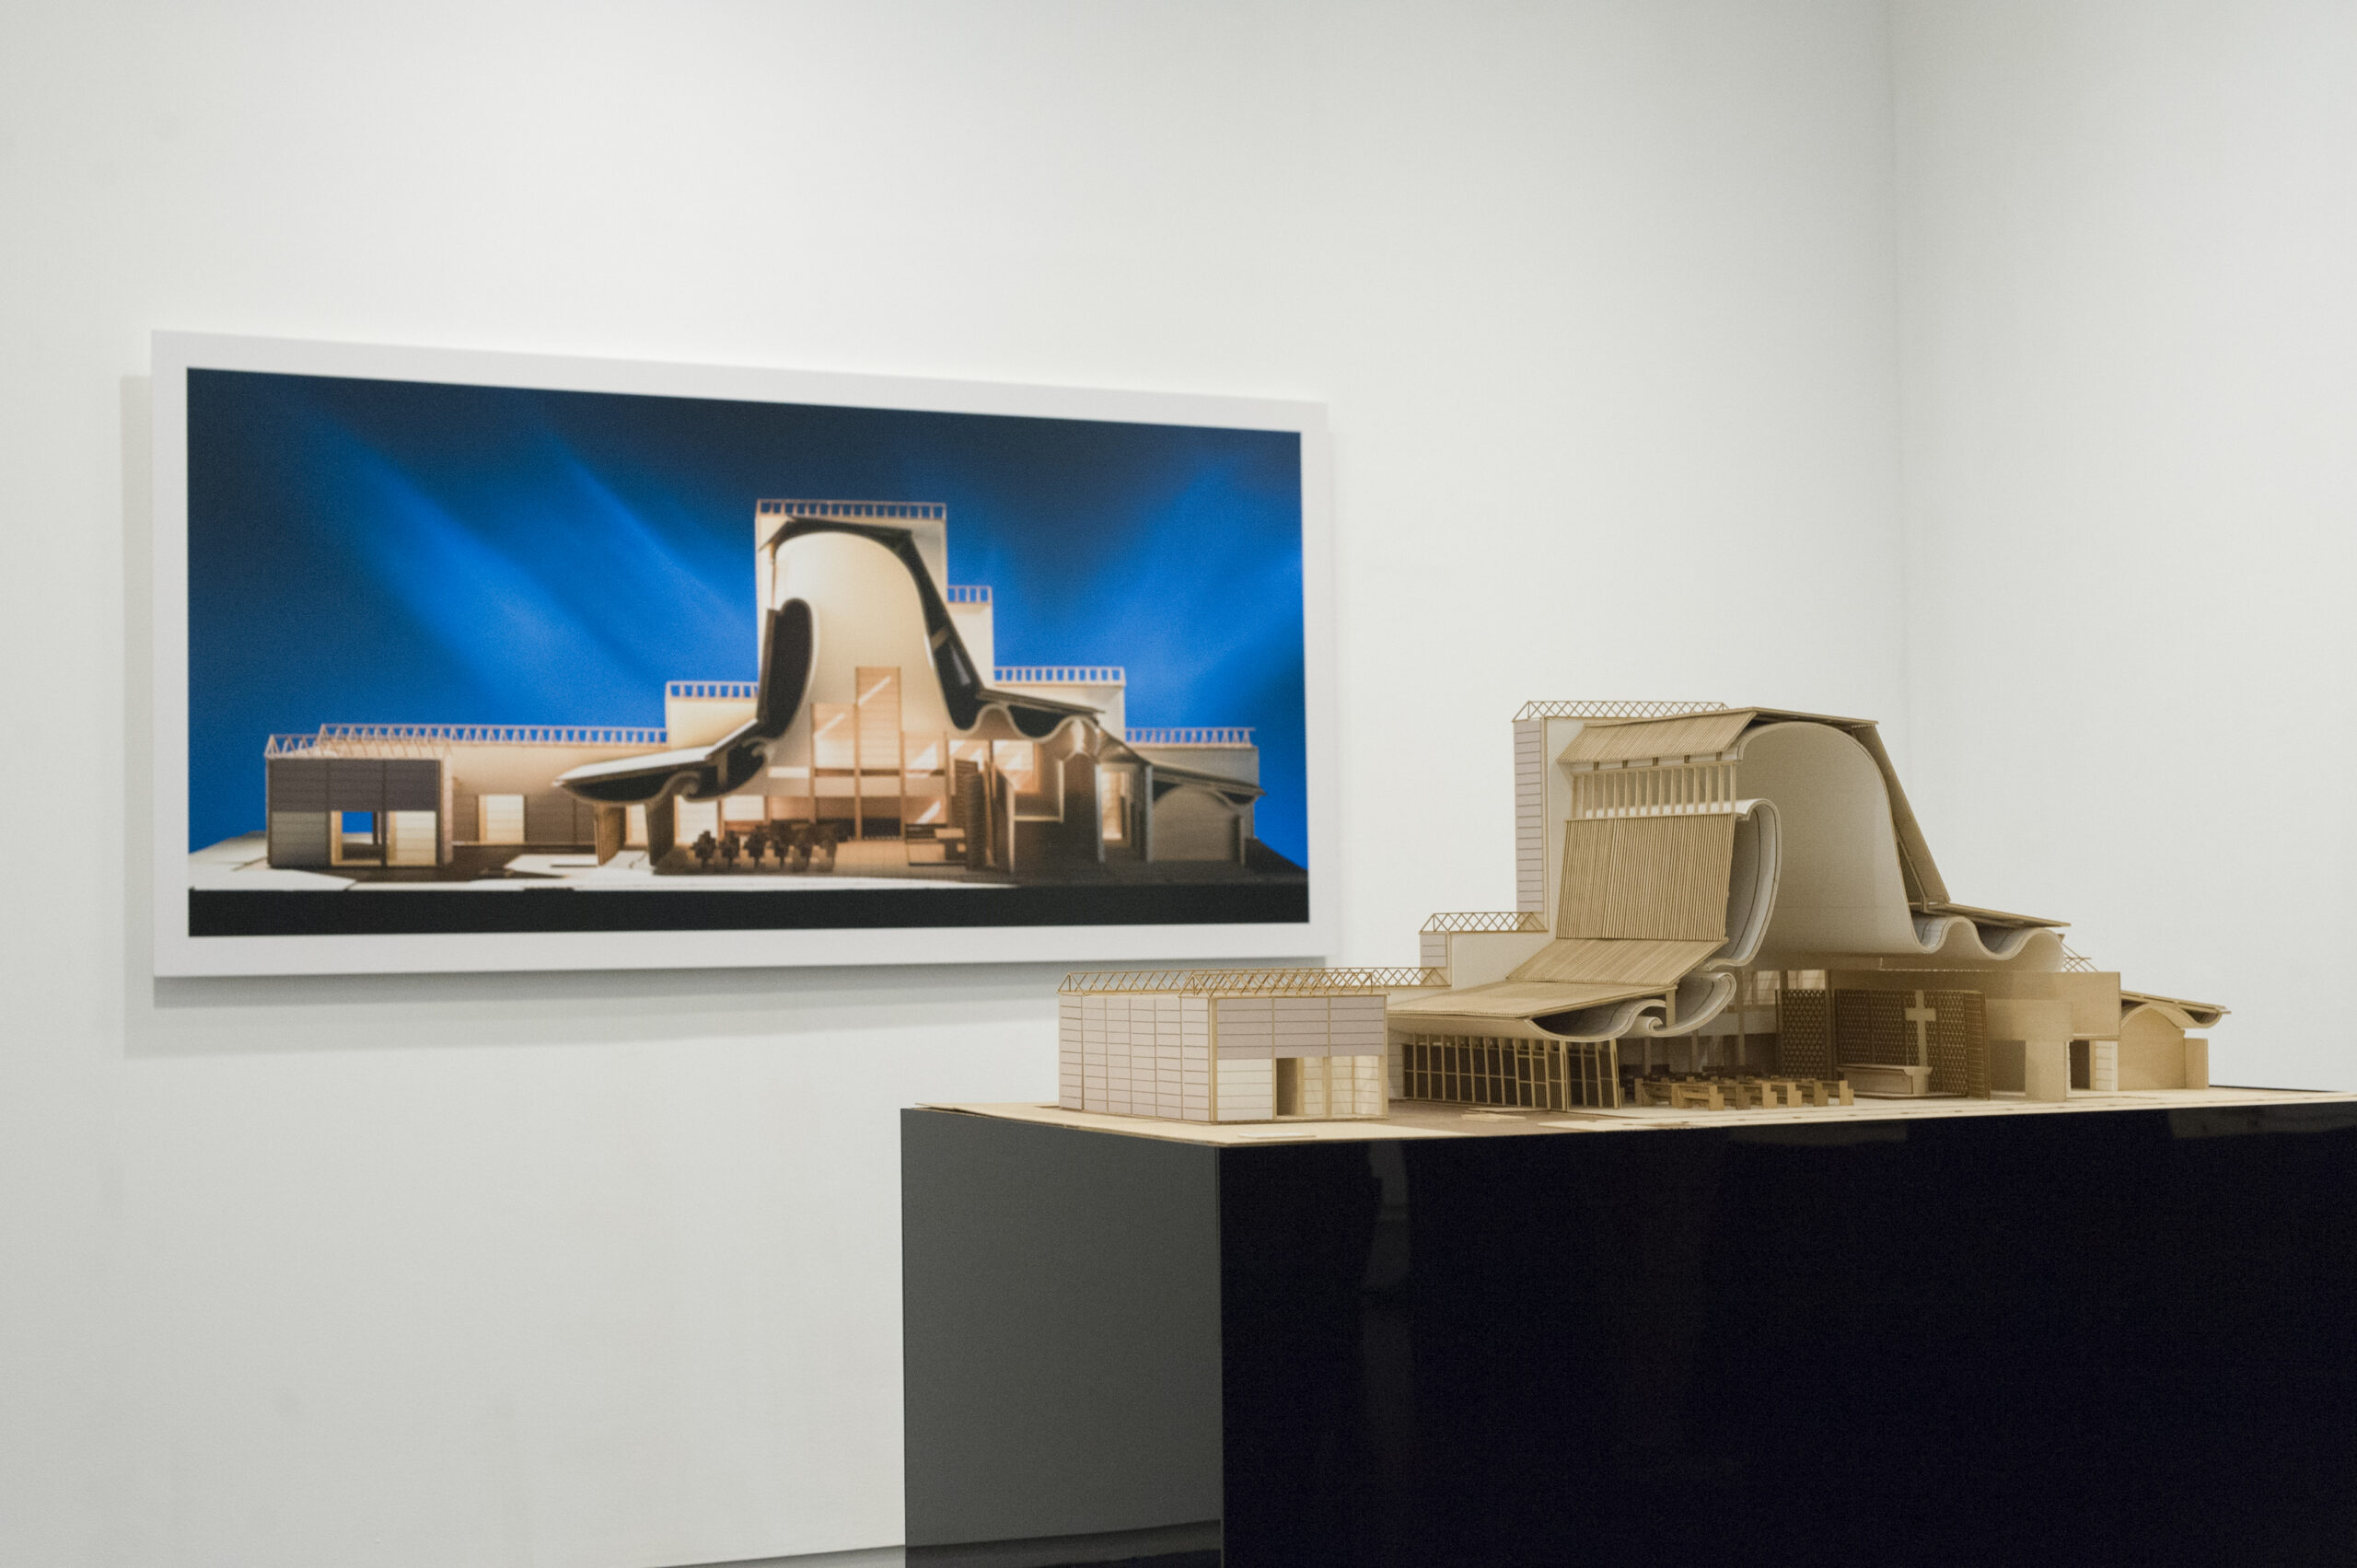 A model of Jorn Utzon's Bagsværd Church by former GSAPP students and accompanying photograph by James Ewing. Featured in the Stagecraft: Models and Photos exhibition at the Arthur Ross Architecture Gallery at Columbia GSAPP.